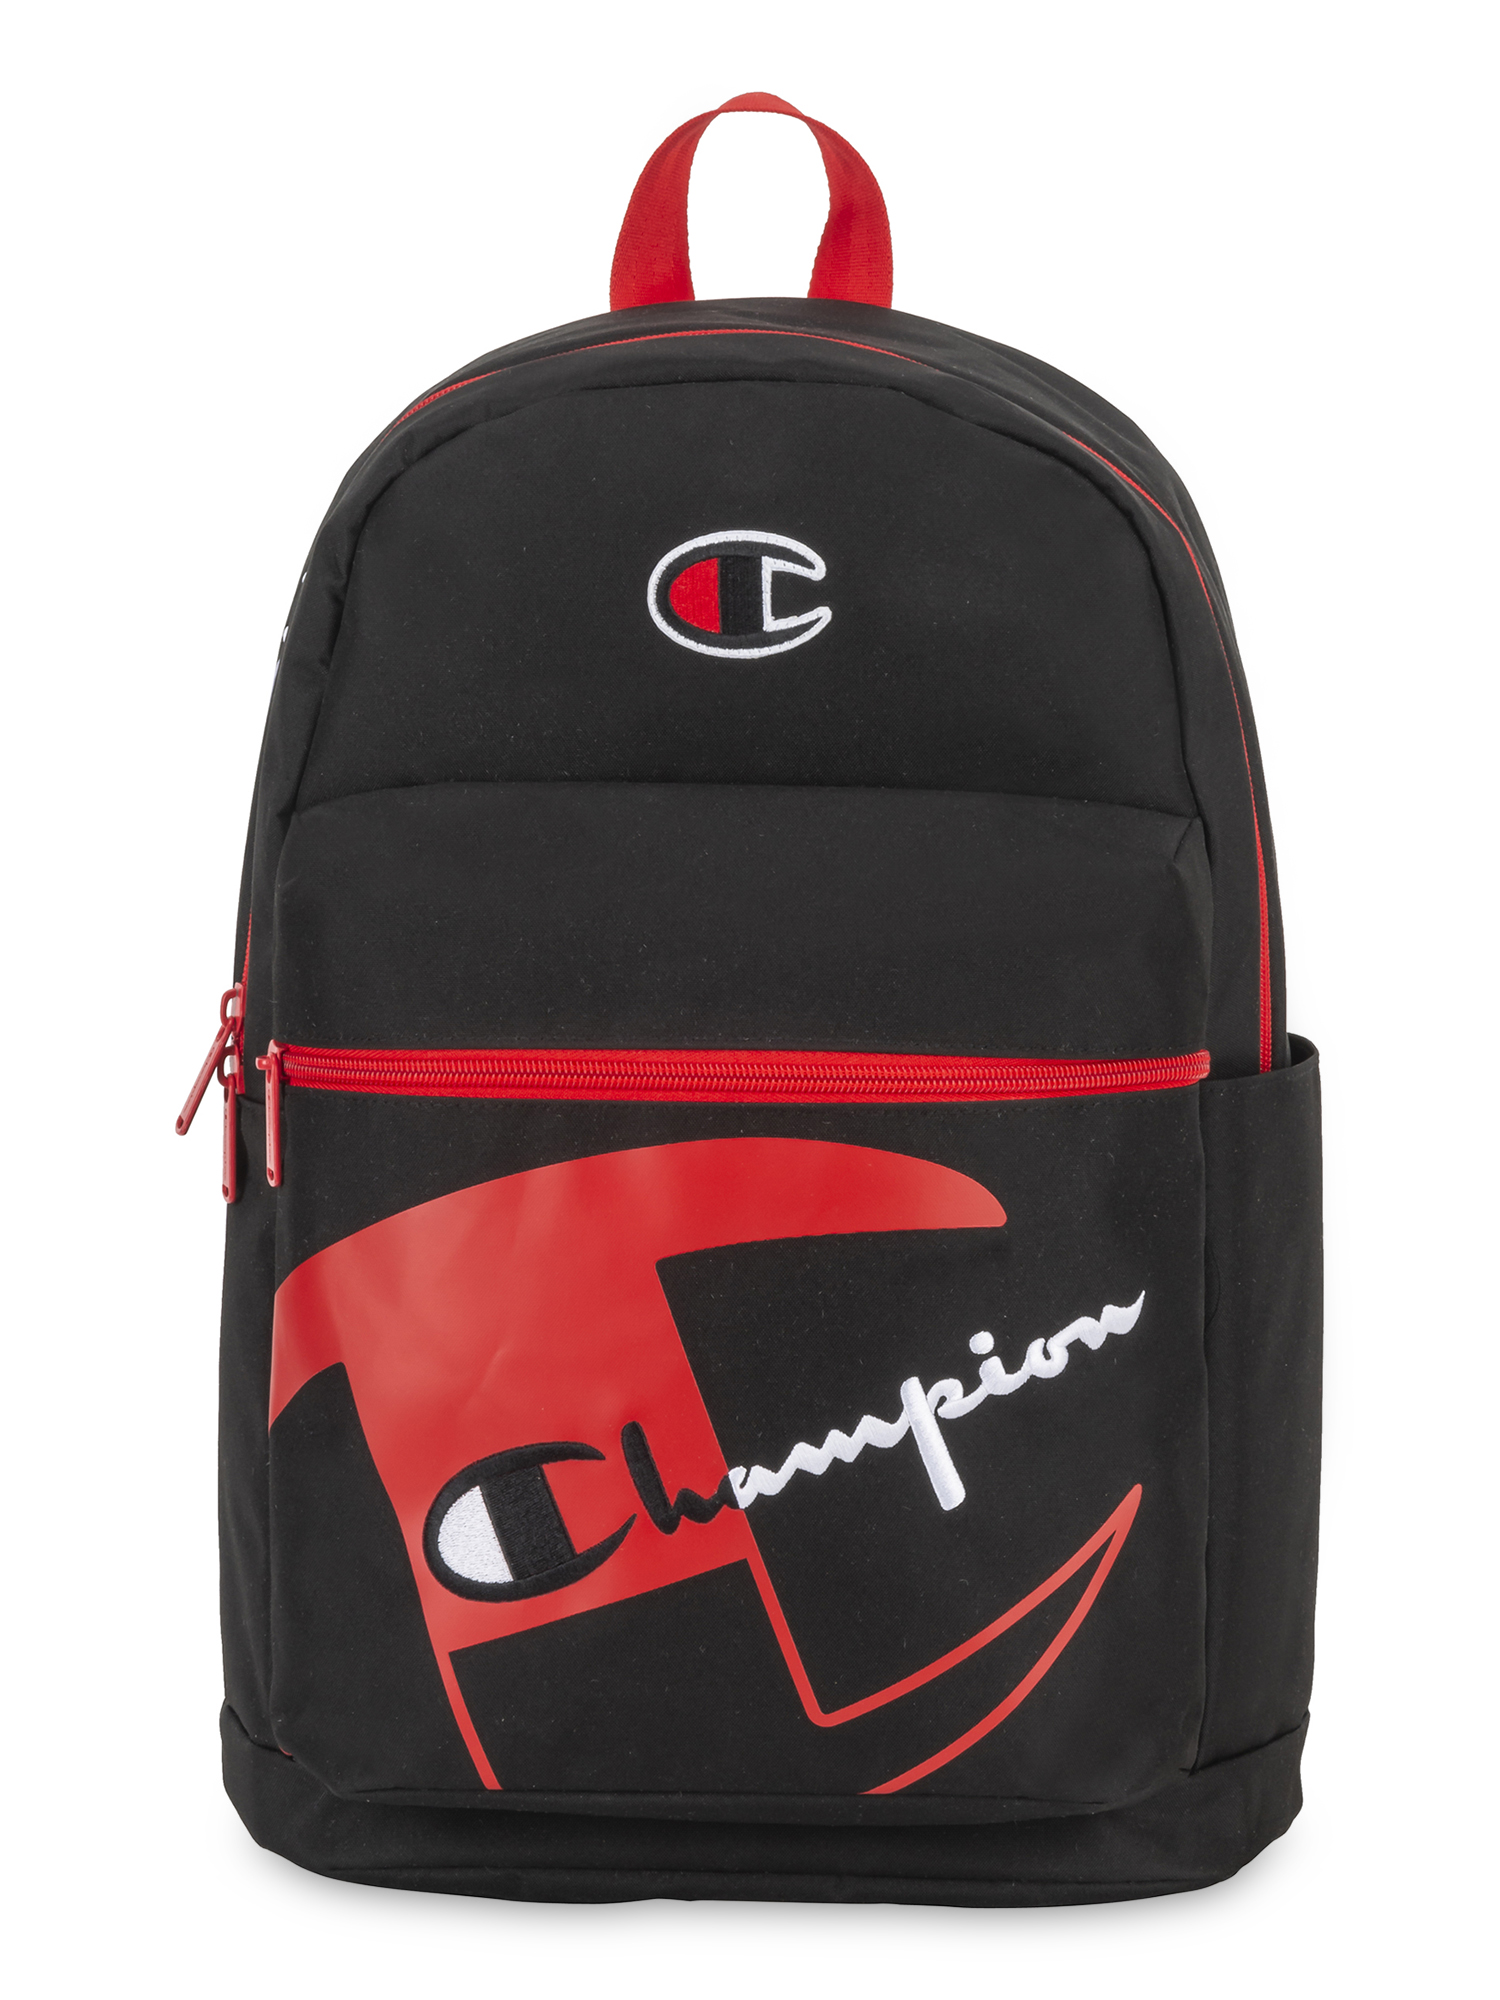 Champion Youth Supercize Backpack - image 1 of 4